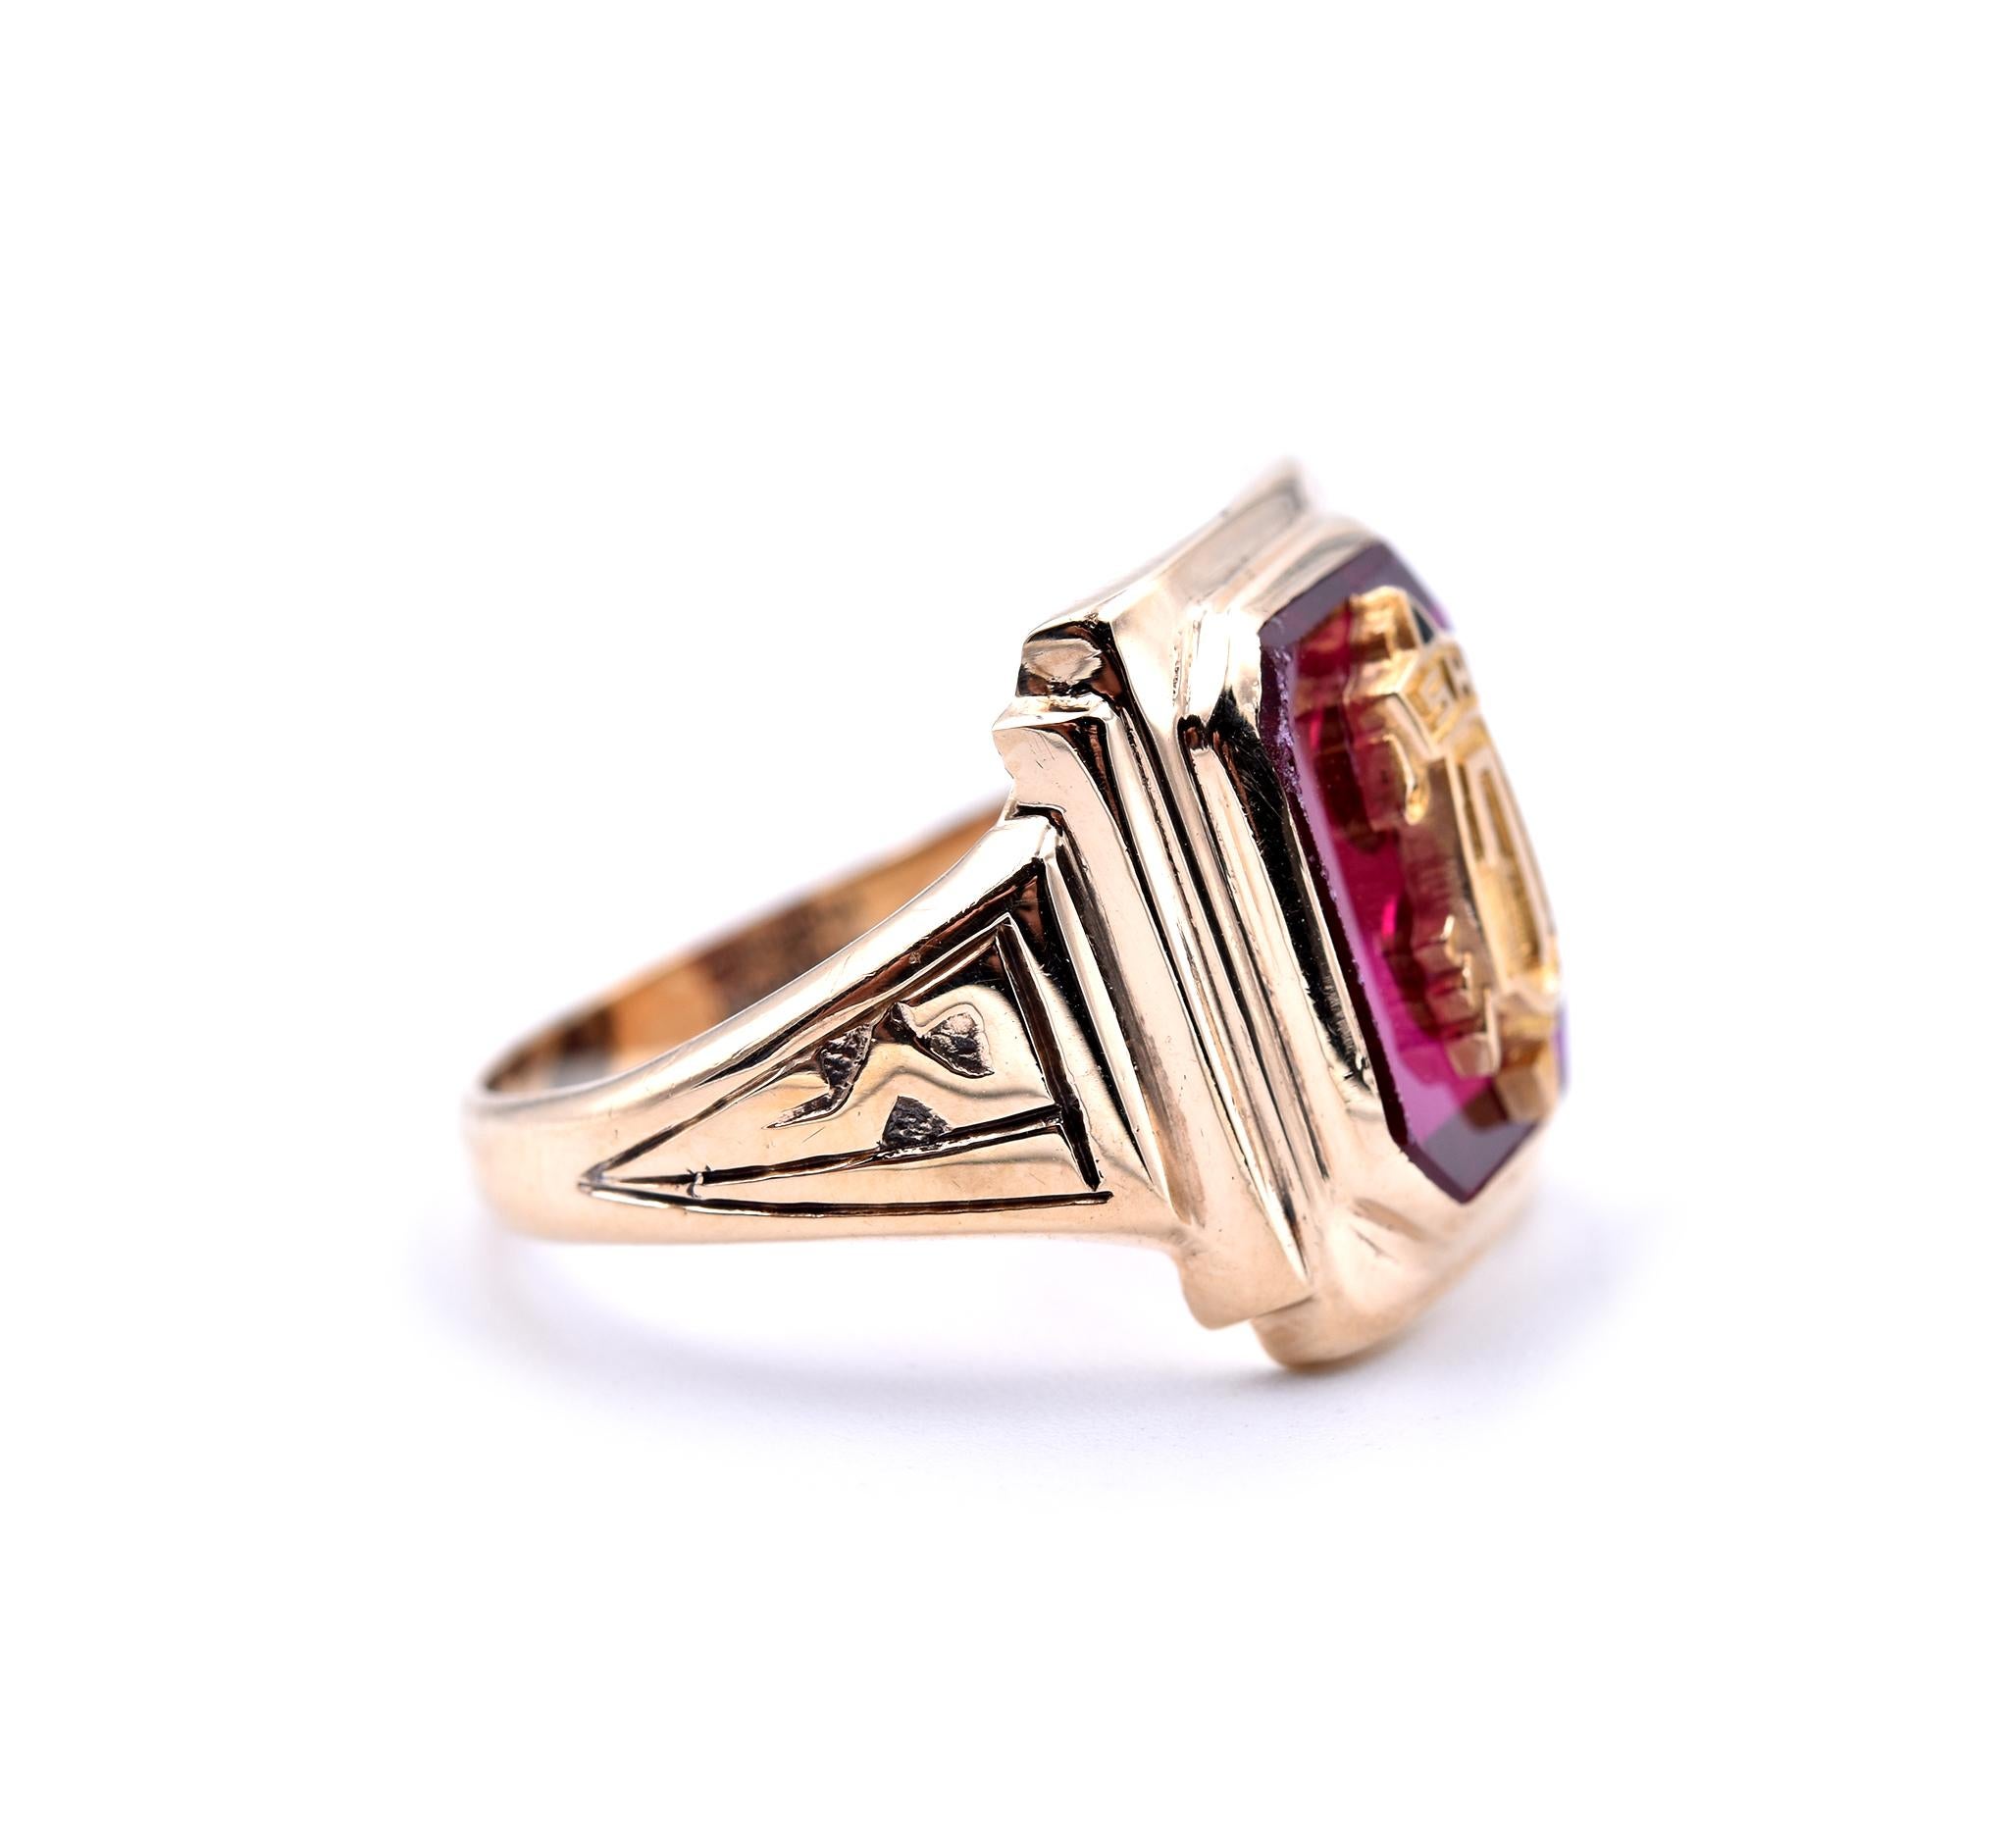 Designer: Vintage
Material: 10k yellow gold
Size: 5 ¼   (please allow two additional shipping days for sizing requests)
Dimensions: Ring Top Measures 22.04mm x 20.63mm
Weight: 6.2 grams
